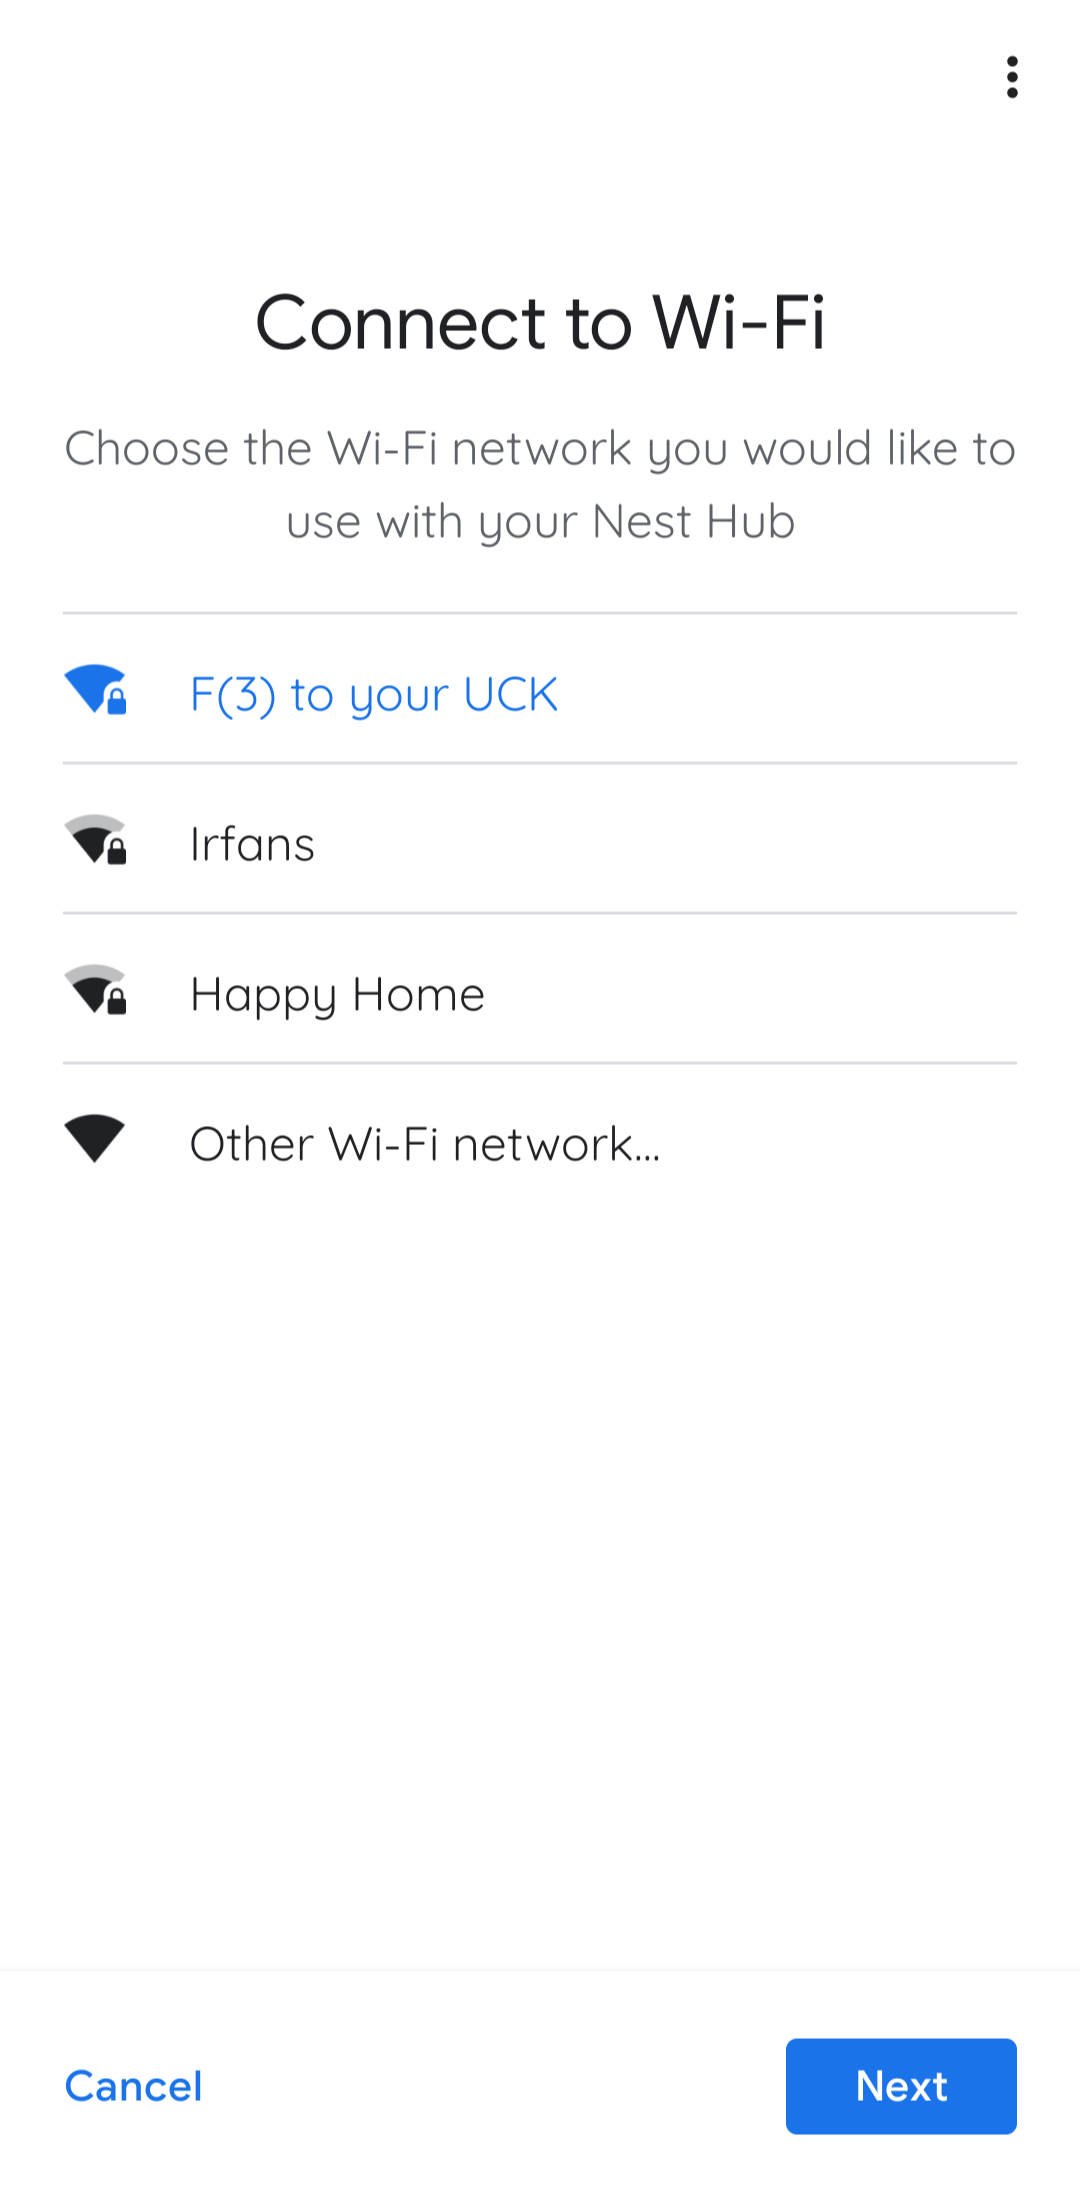 Step 6: Connect to Your Wi-Fi